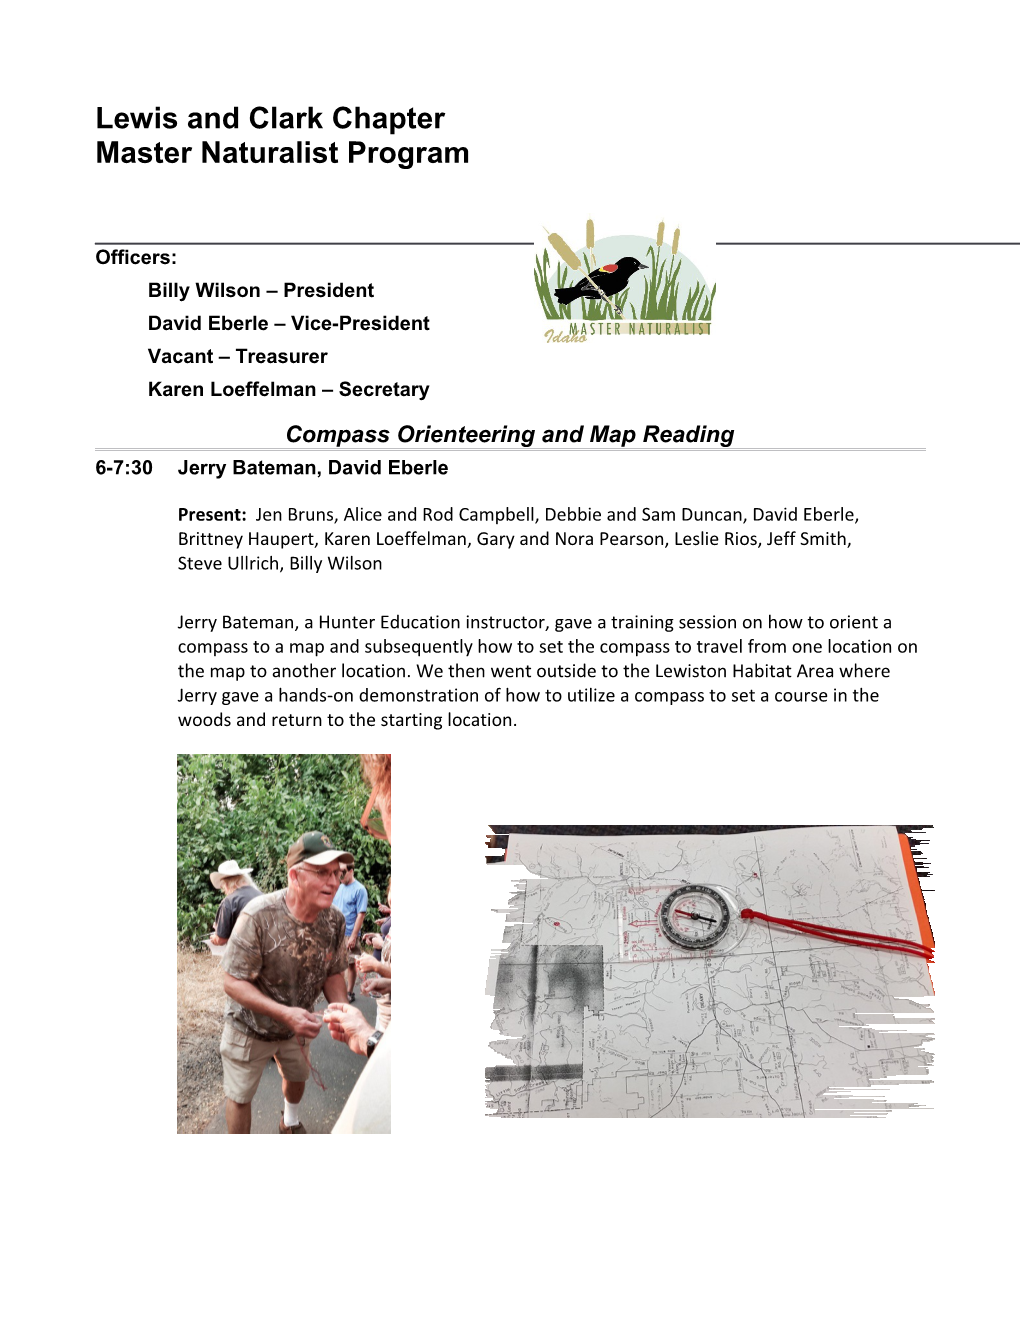 Idaho Master Naturalist Lewis and Clark Chapter Meeting Minutes, 08-13-2015